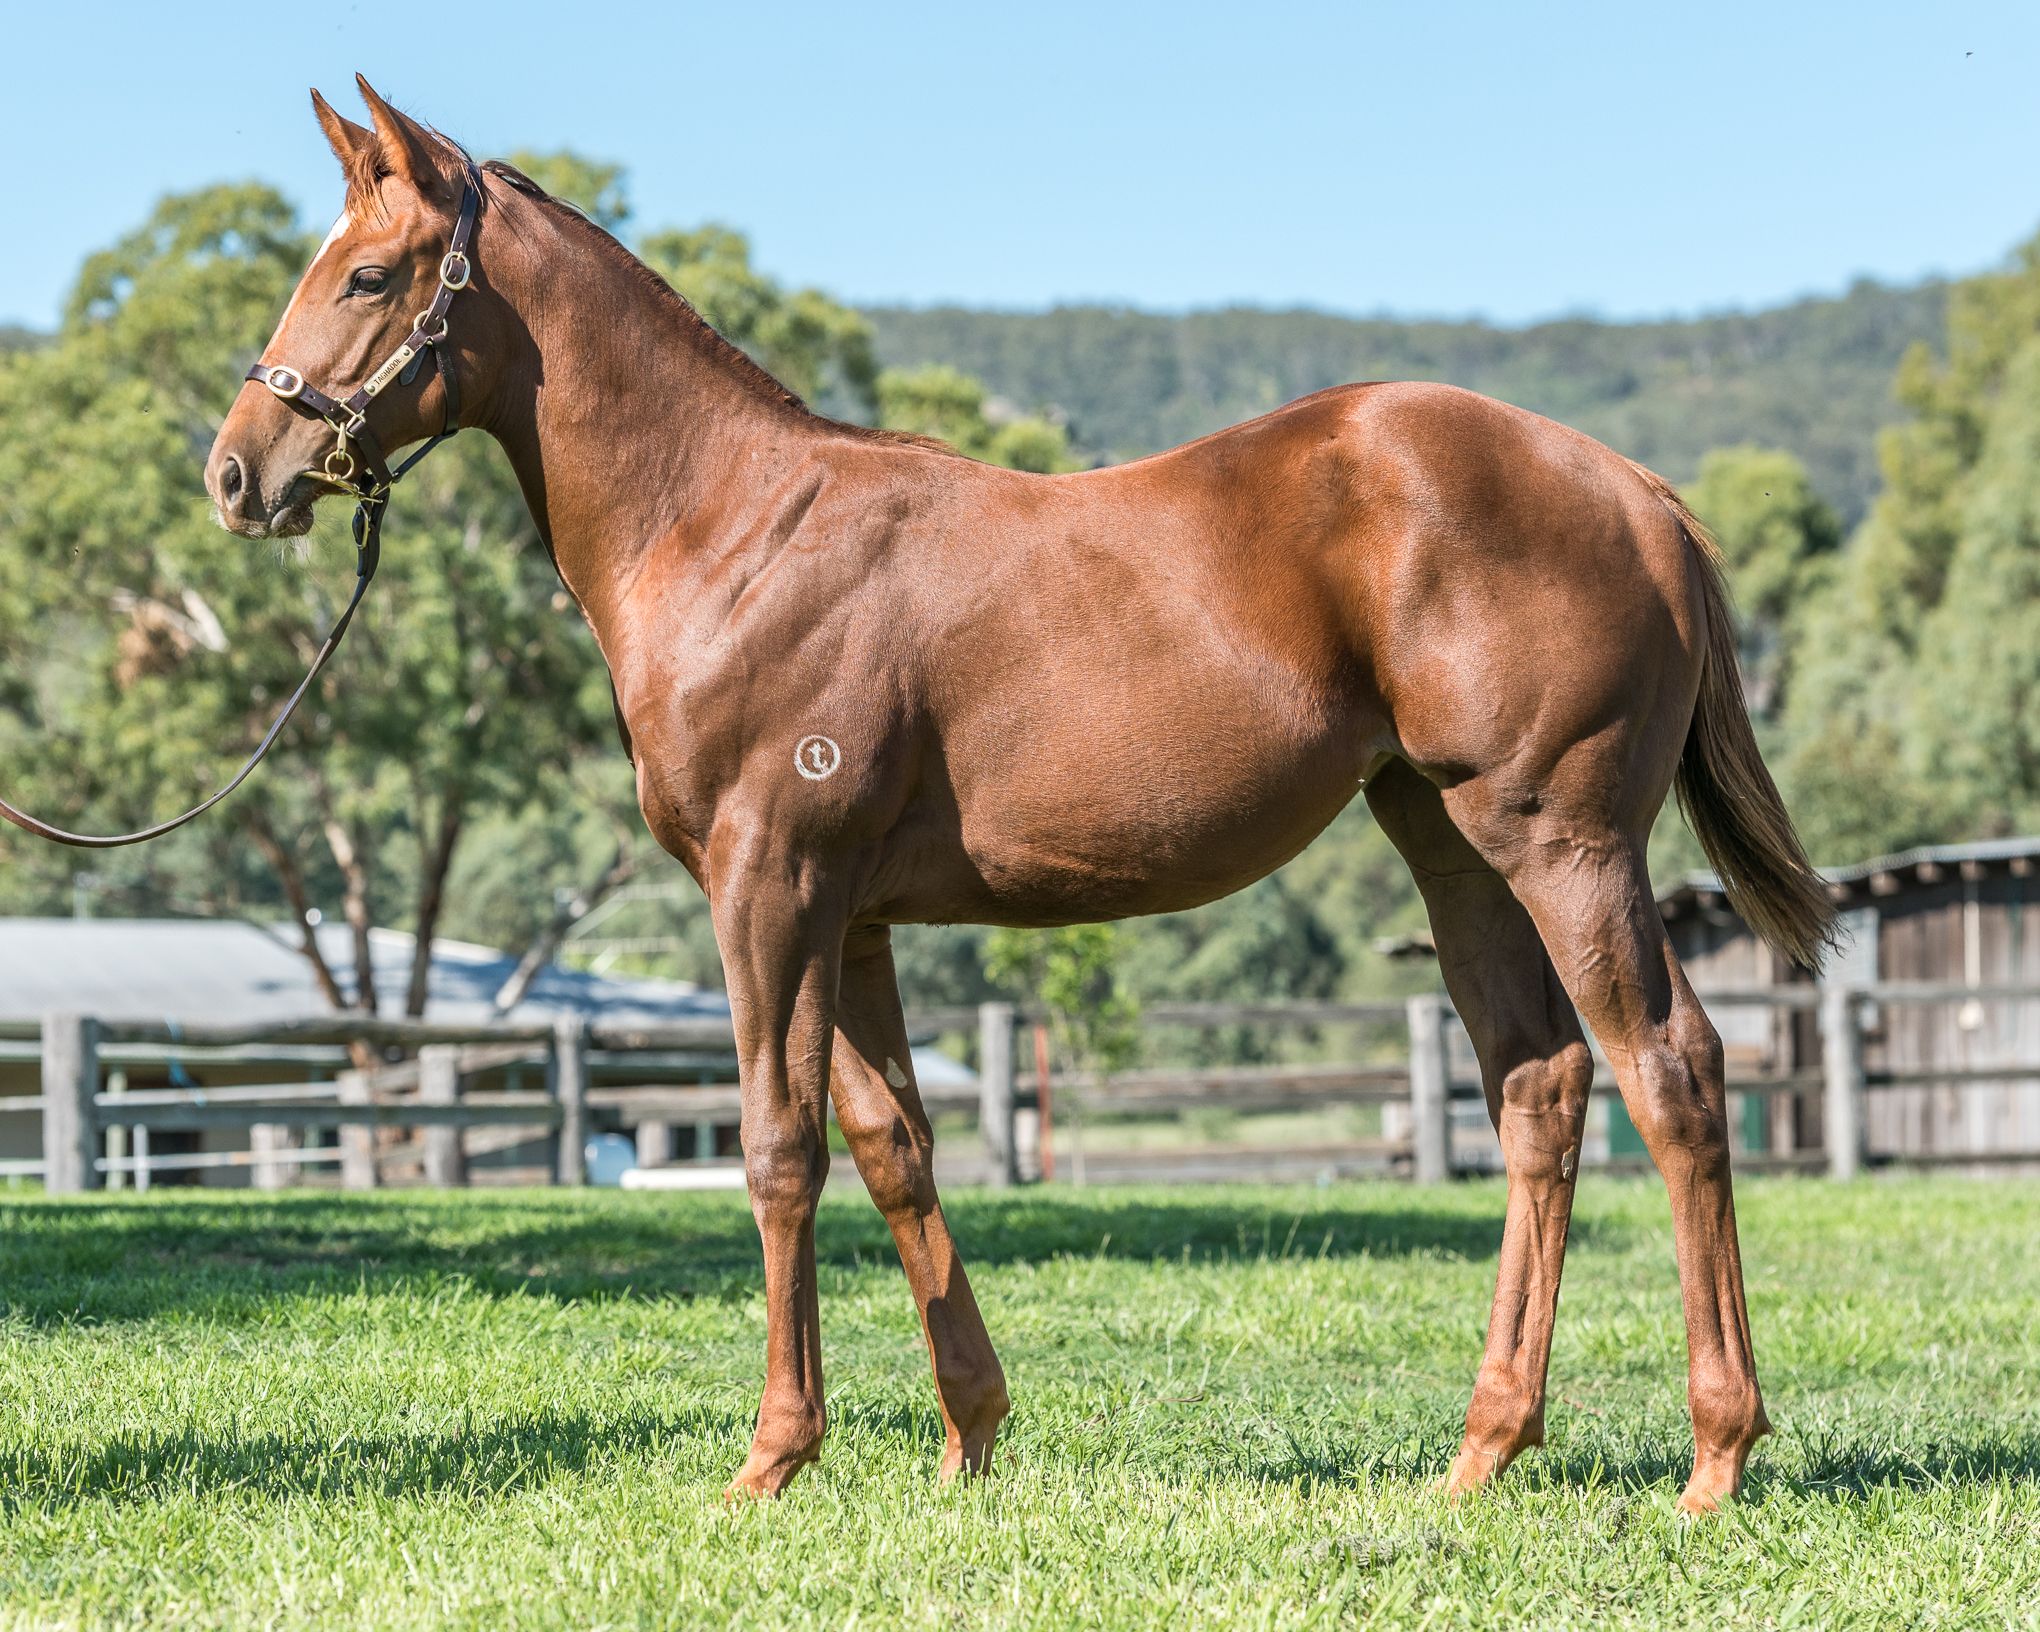 Amasenus at 2017 Australian Broodmare and Weanling Sale